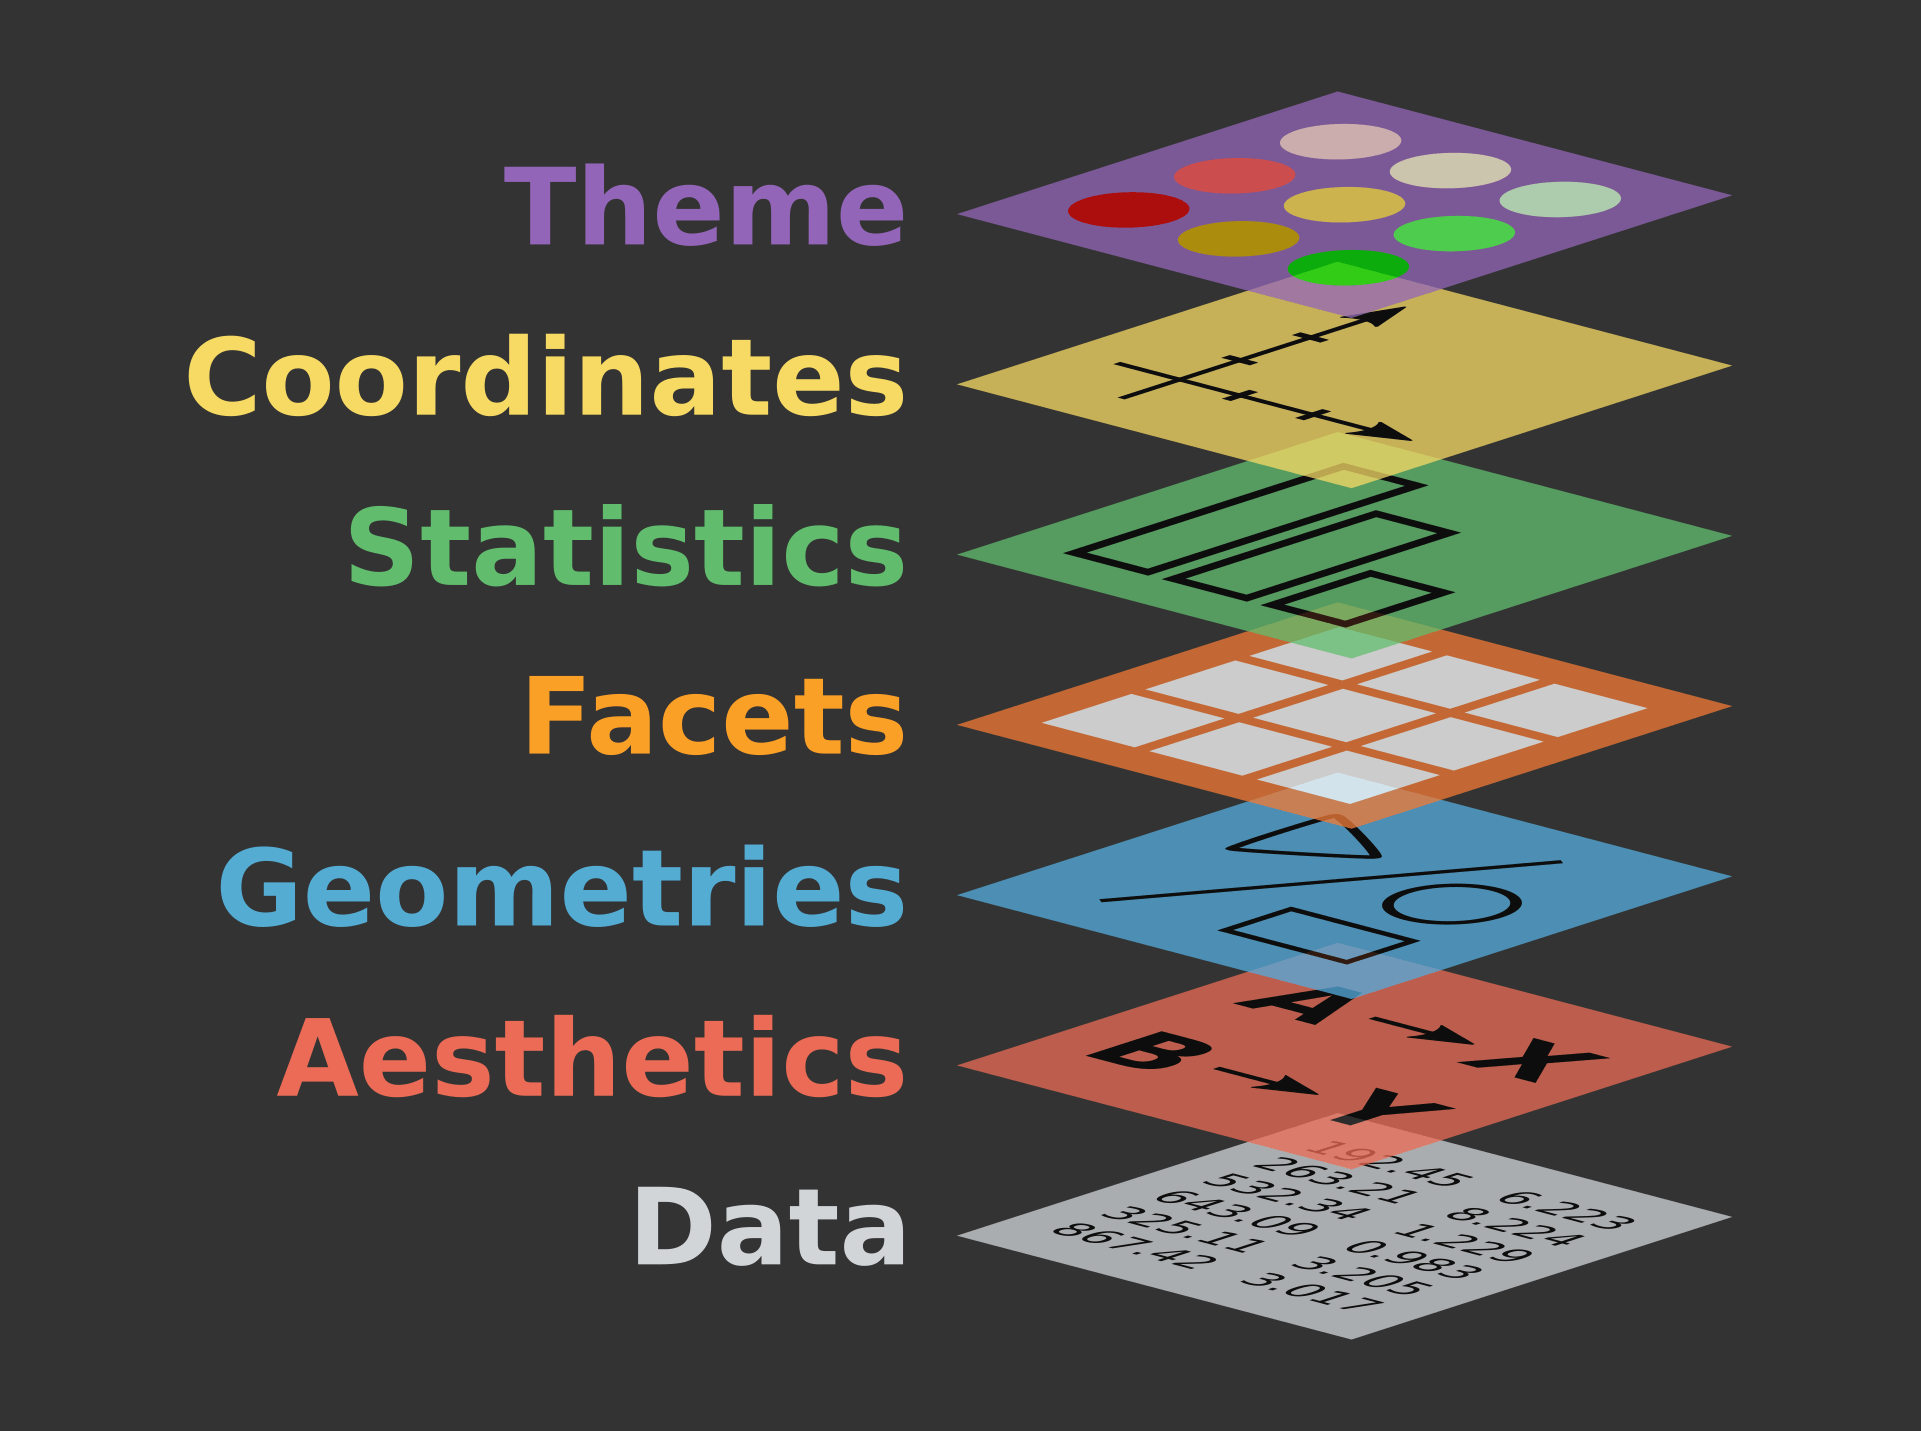 the components of a statistical graphic include: data, aesthetics, geometries, facets, statistics, coordinates, and a theme